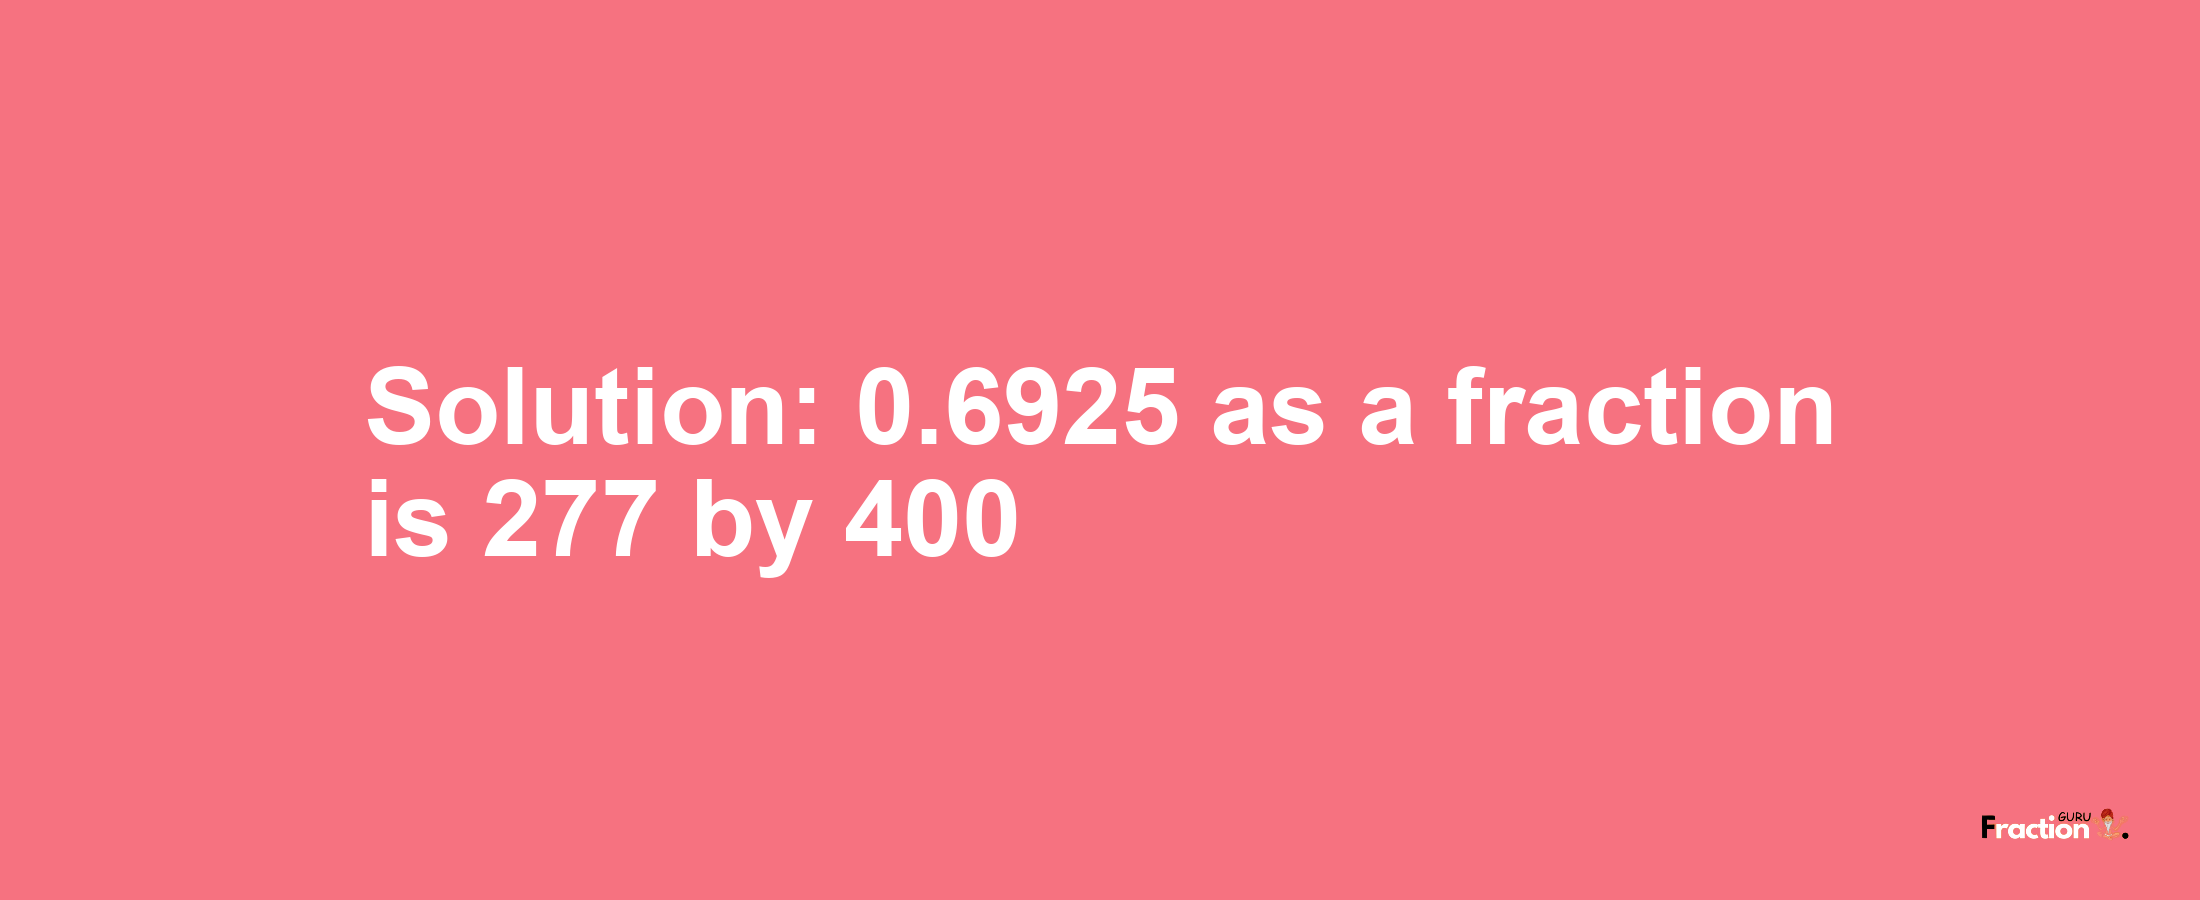 Solution:0.6925 as a fraction is 277/400